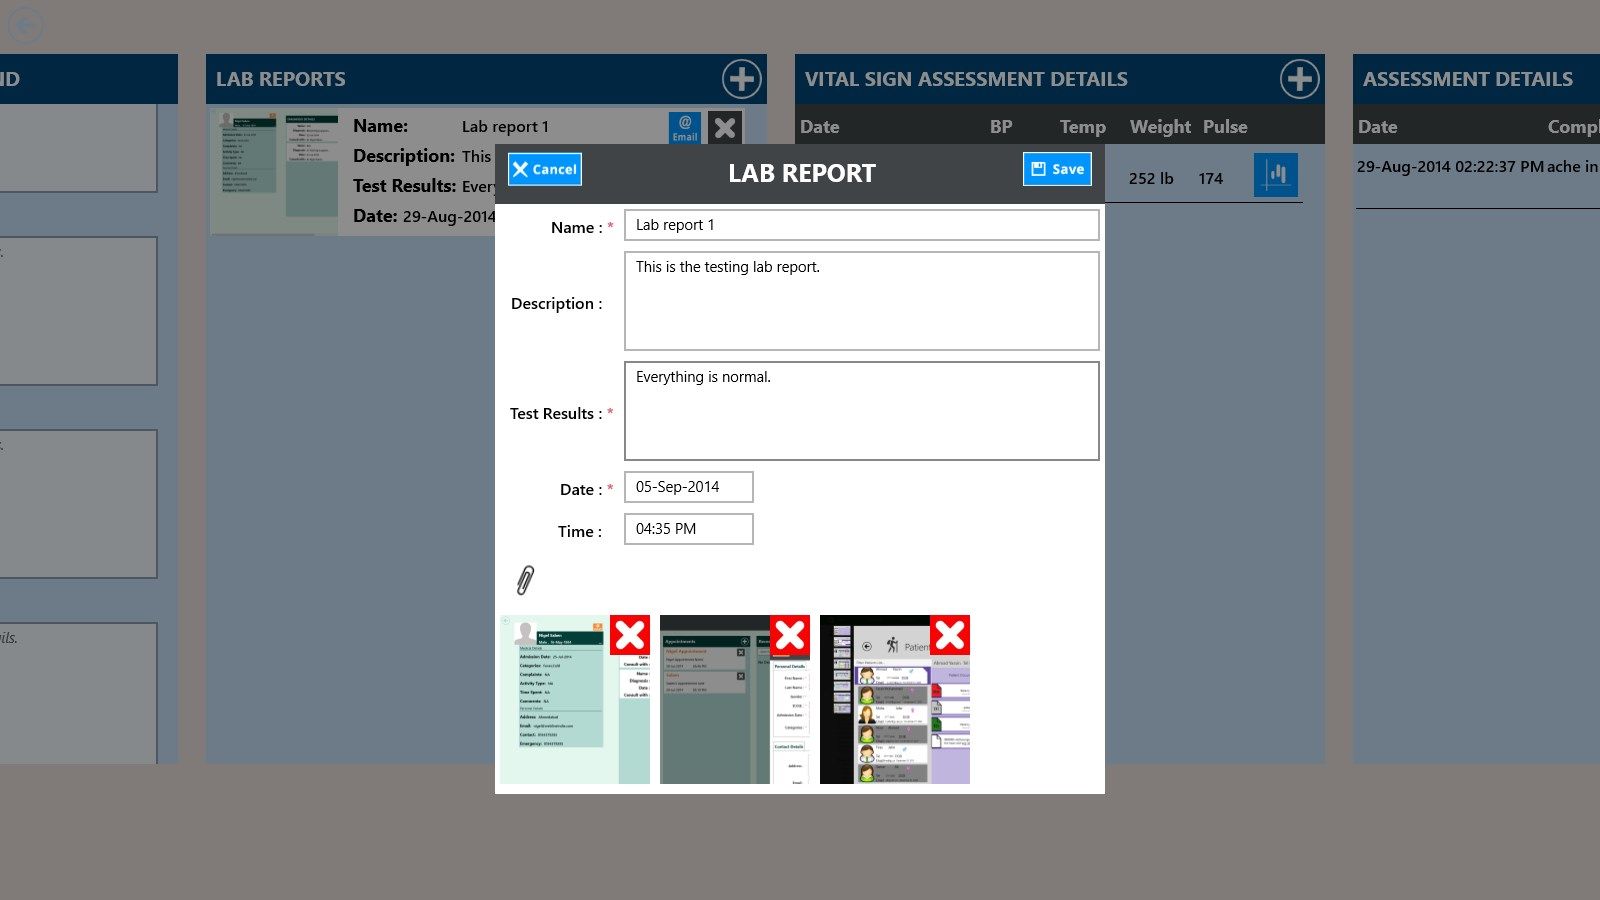 Form for adding reports for any patient with image upload.